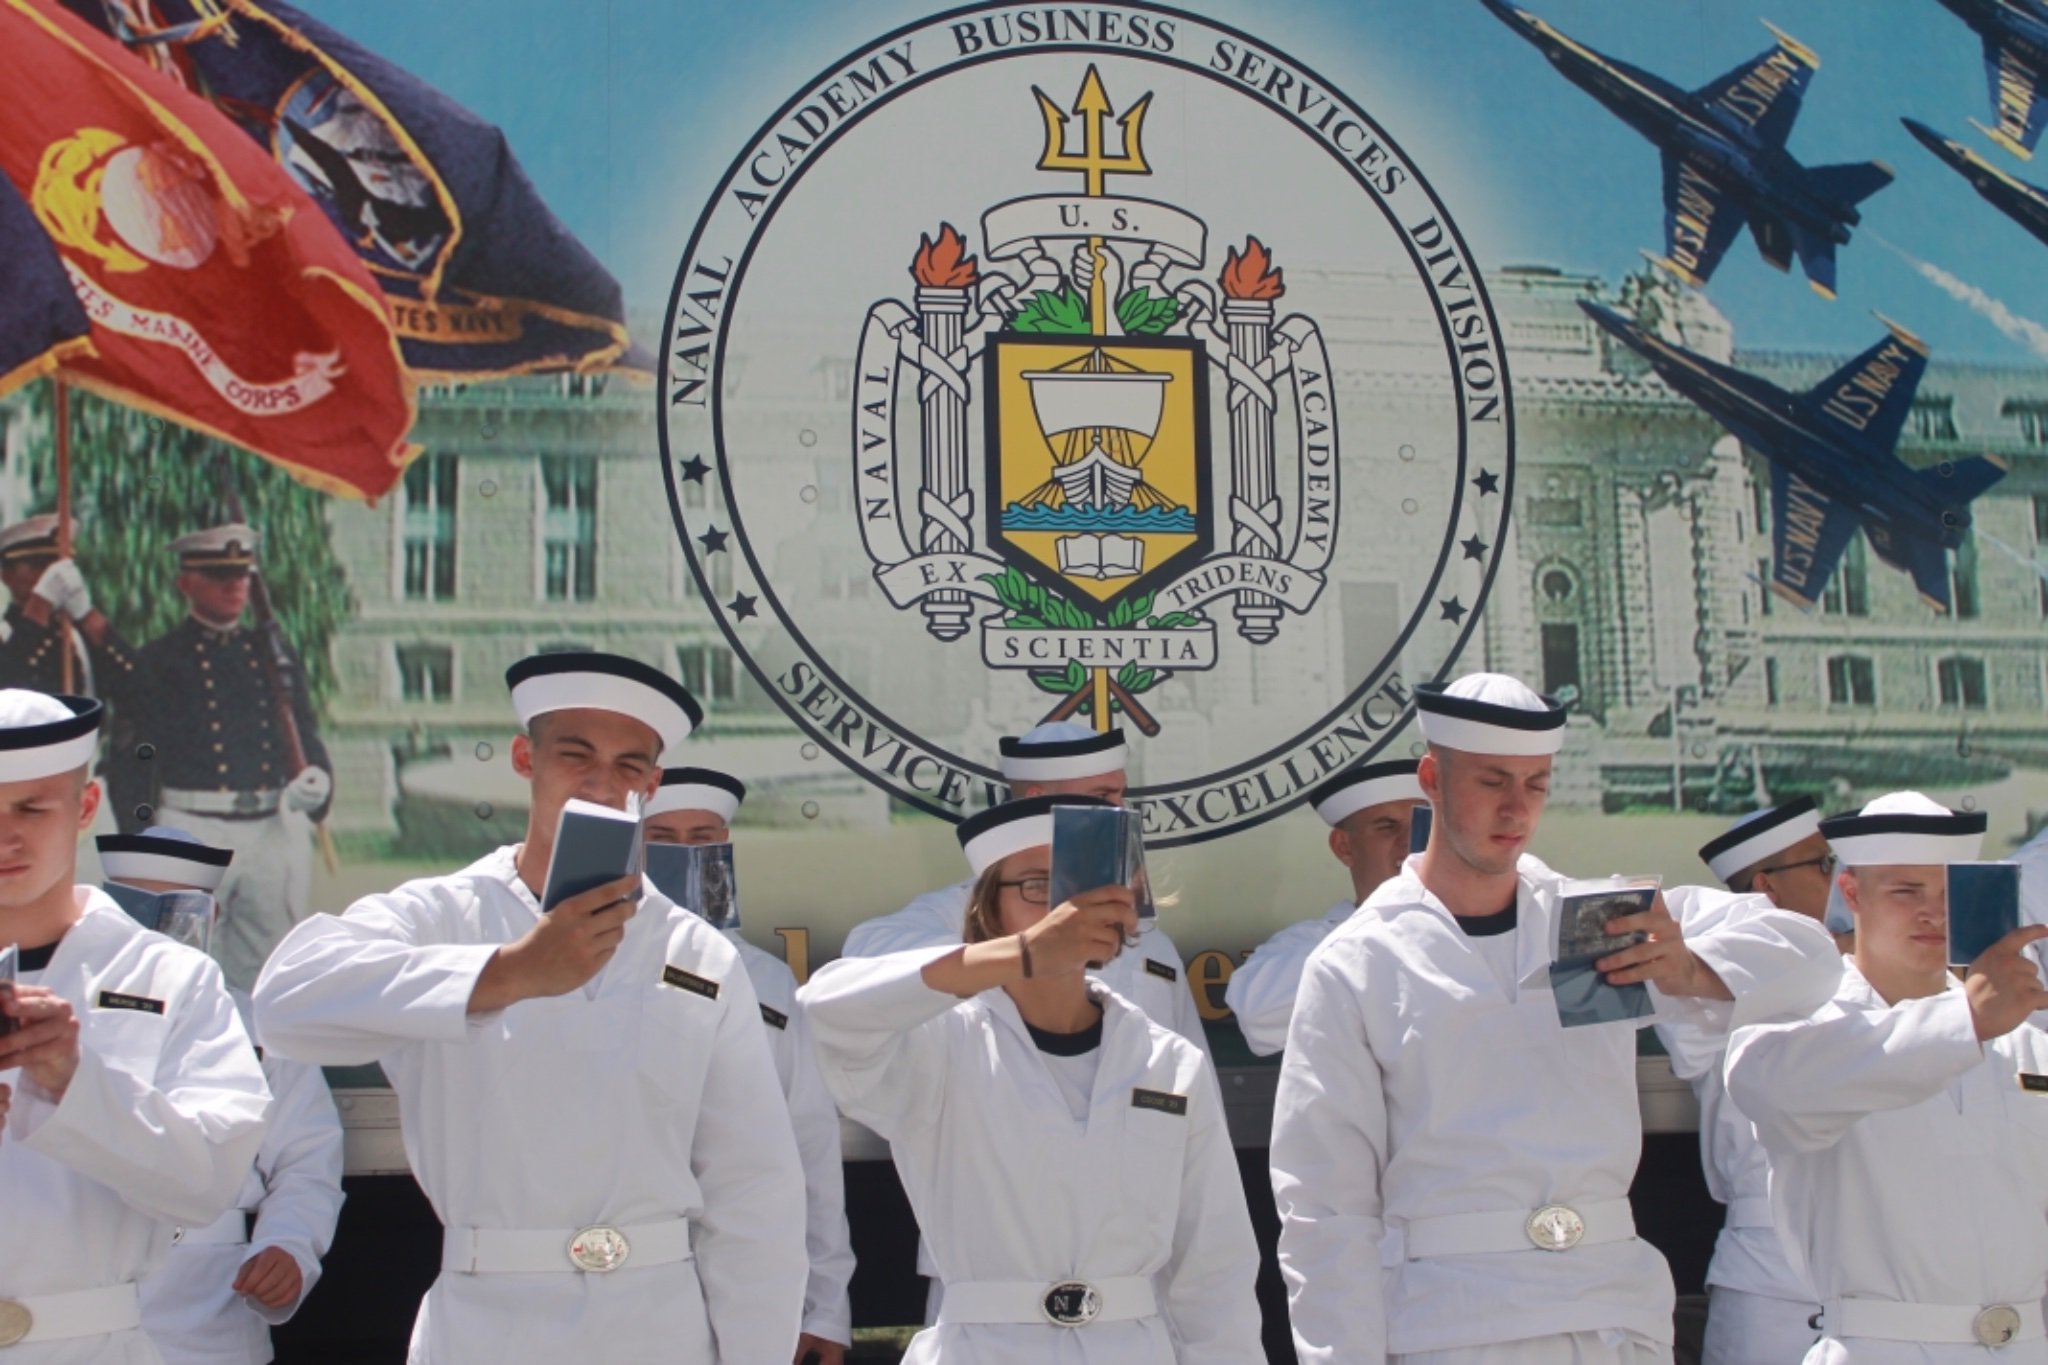 USNA Admissions on Twitter "It is an honor to the USNA Class